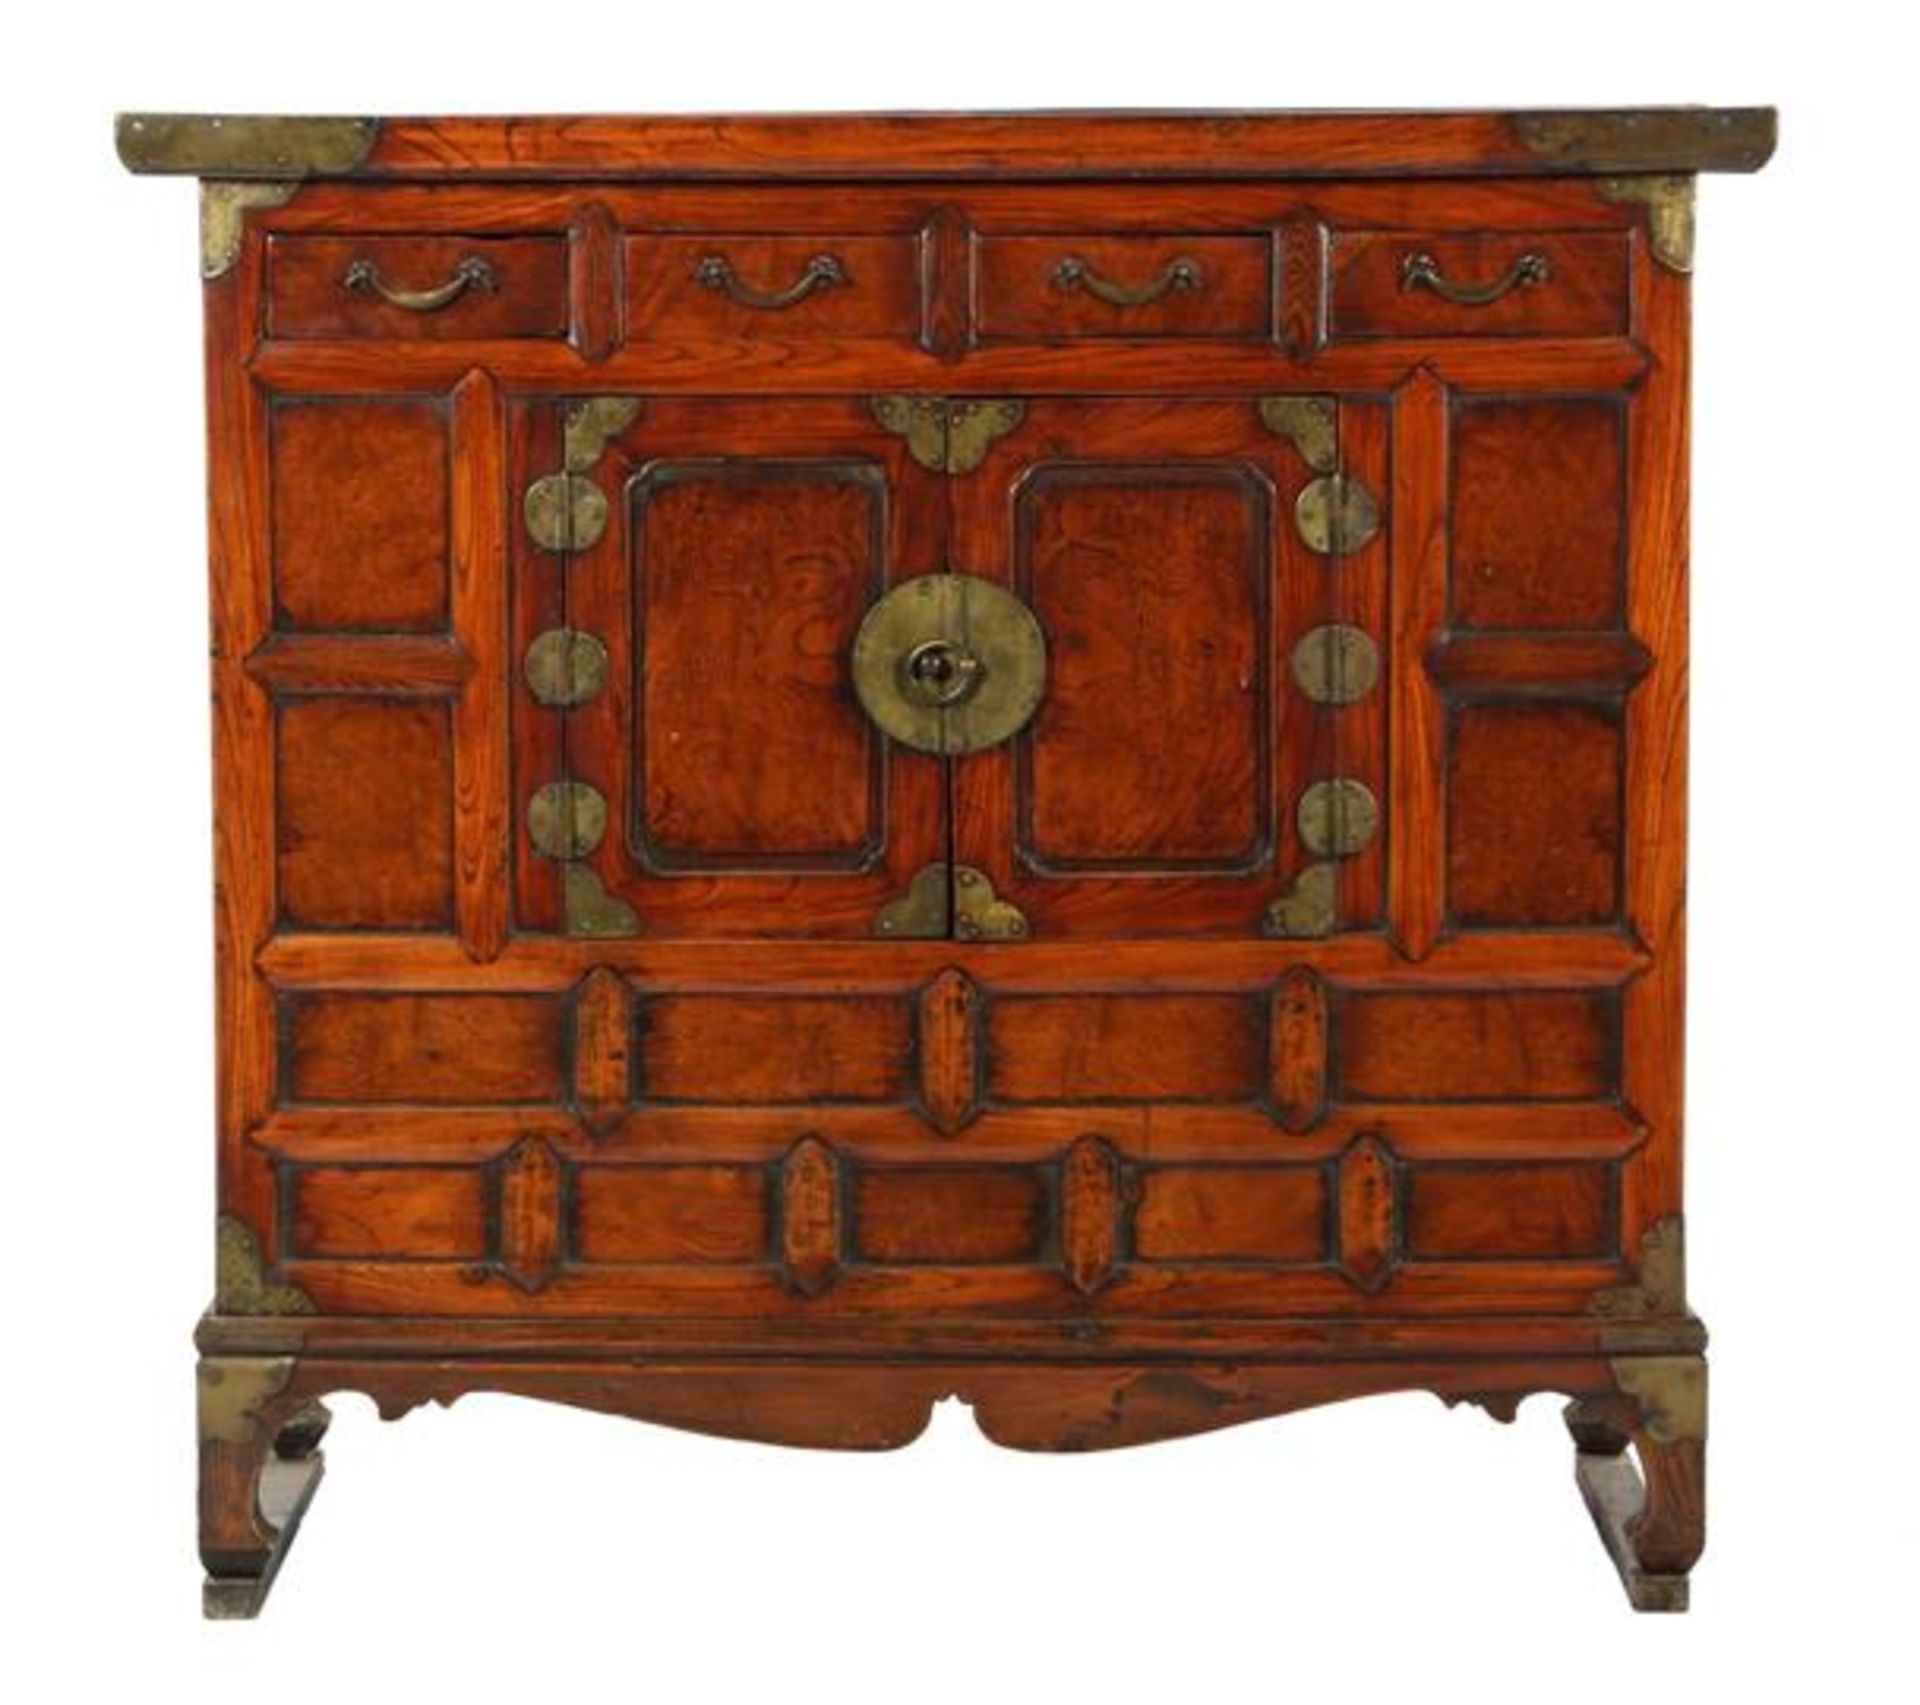 Chinese cabinet made of several types of wood with 4 drawers, 2 doors and brass fittings 91 cm high,